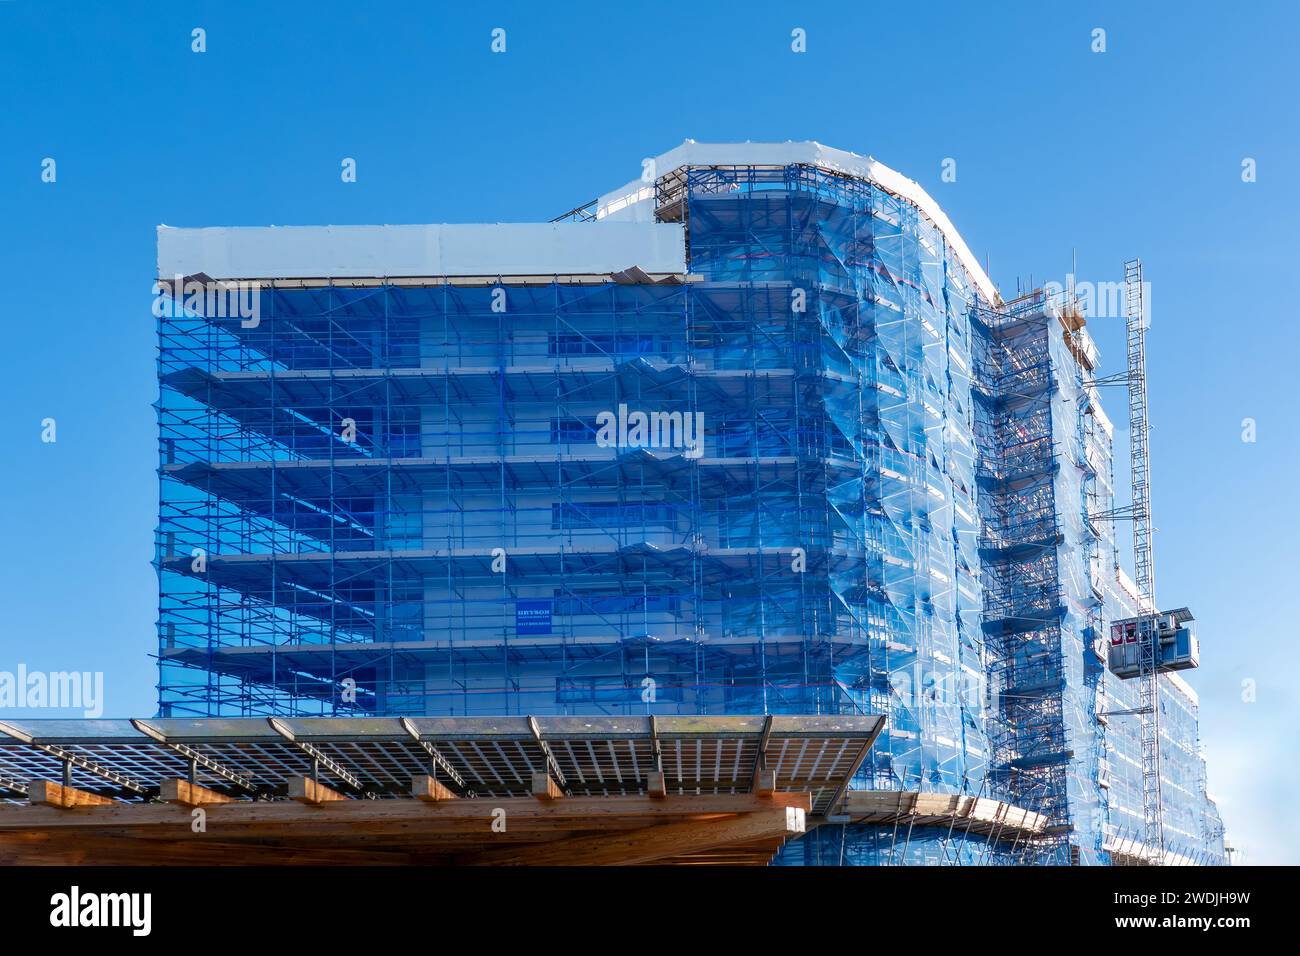 Portishead, UK: extensive scaffolding covered in blue netting placed ...